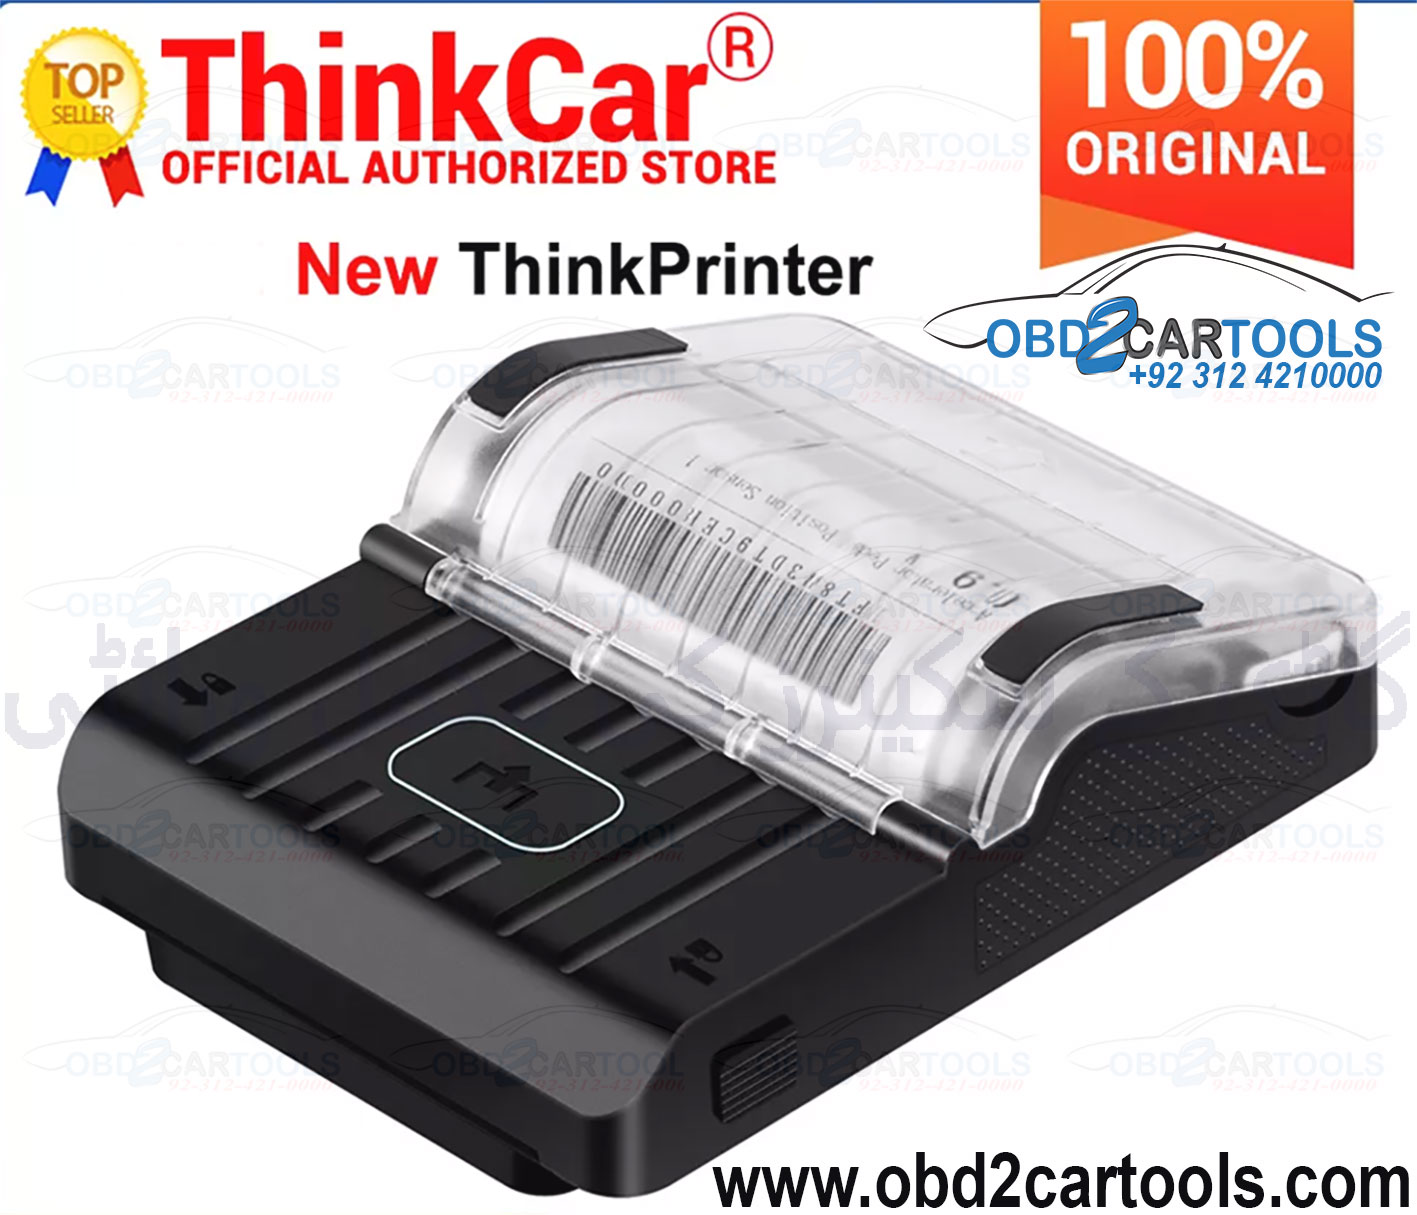 Product image for ThinkCar Mini Printer for ThinkTool Car Scanners